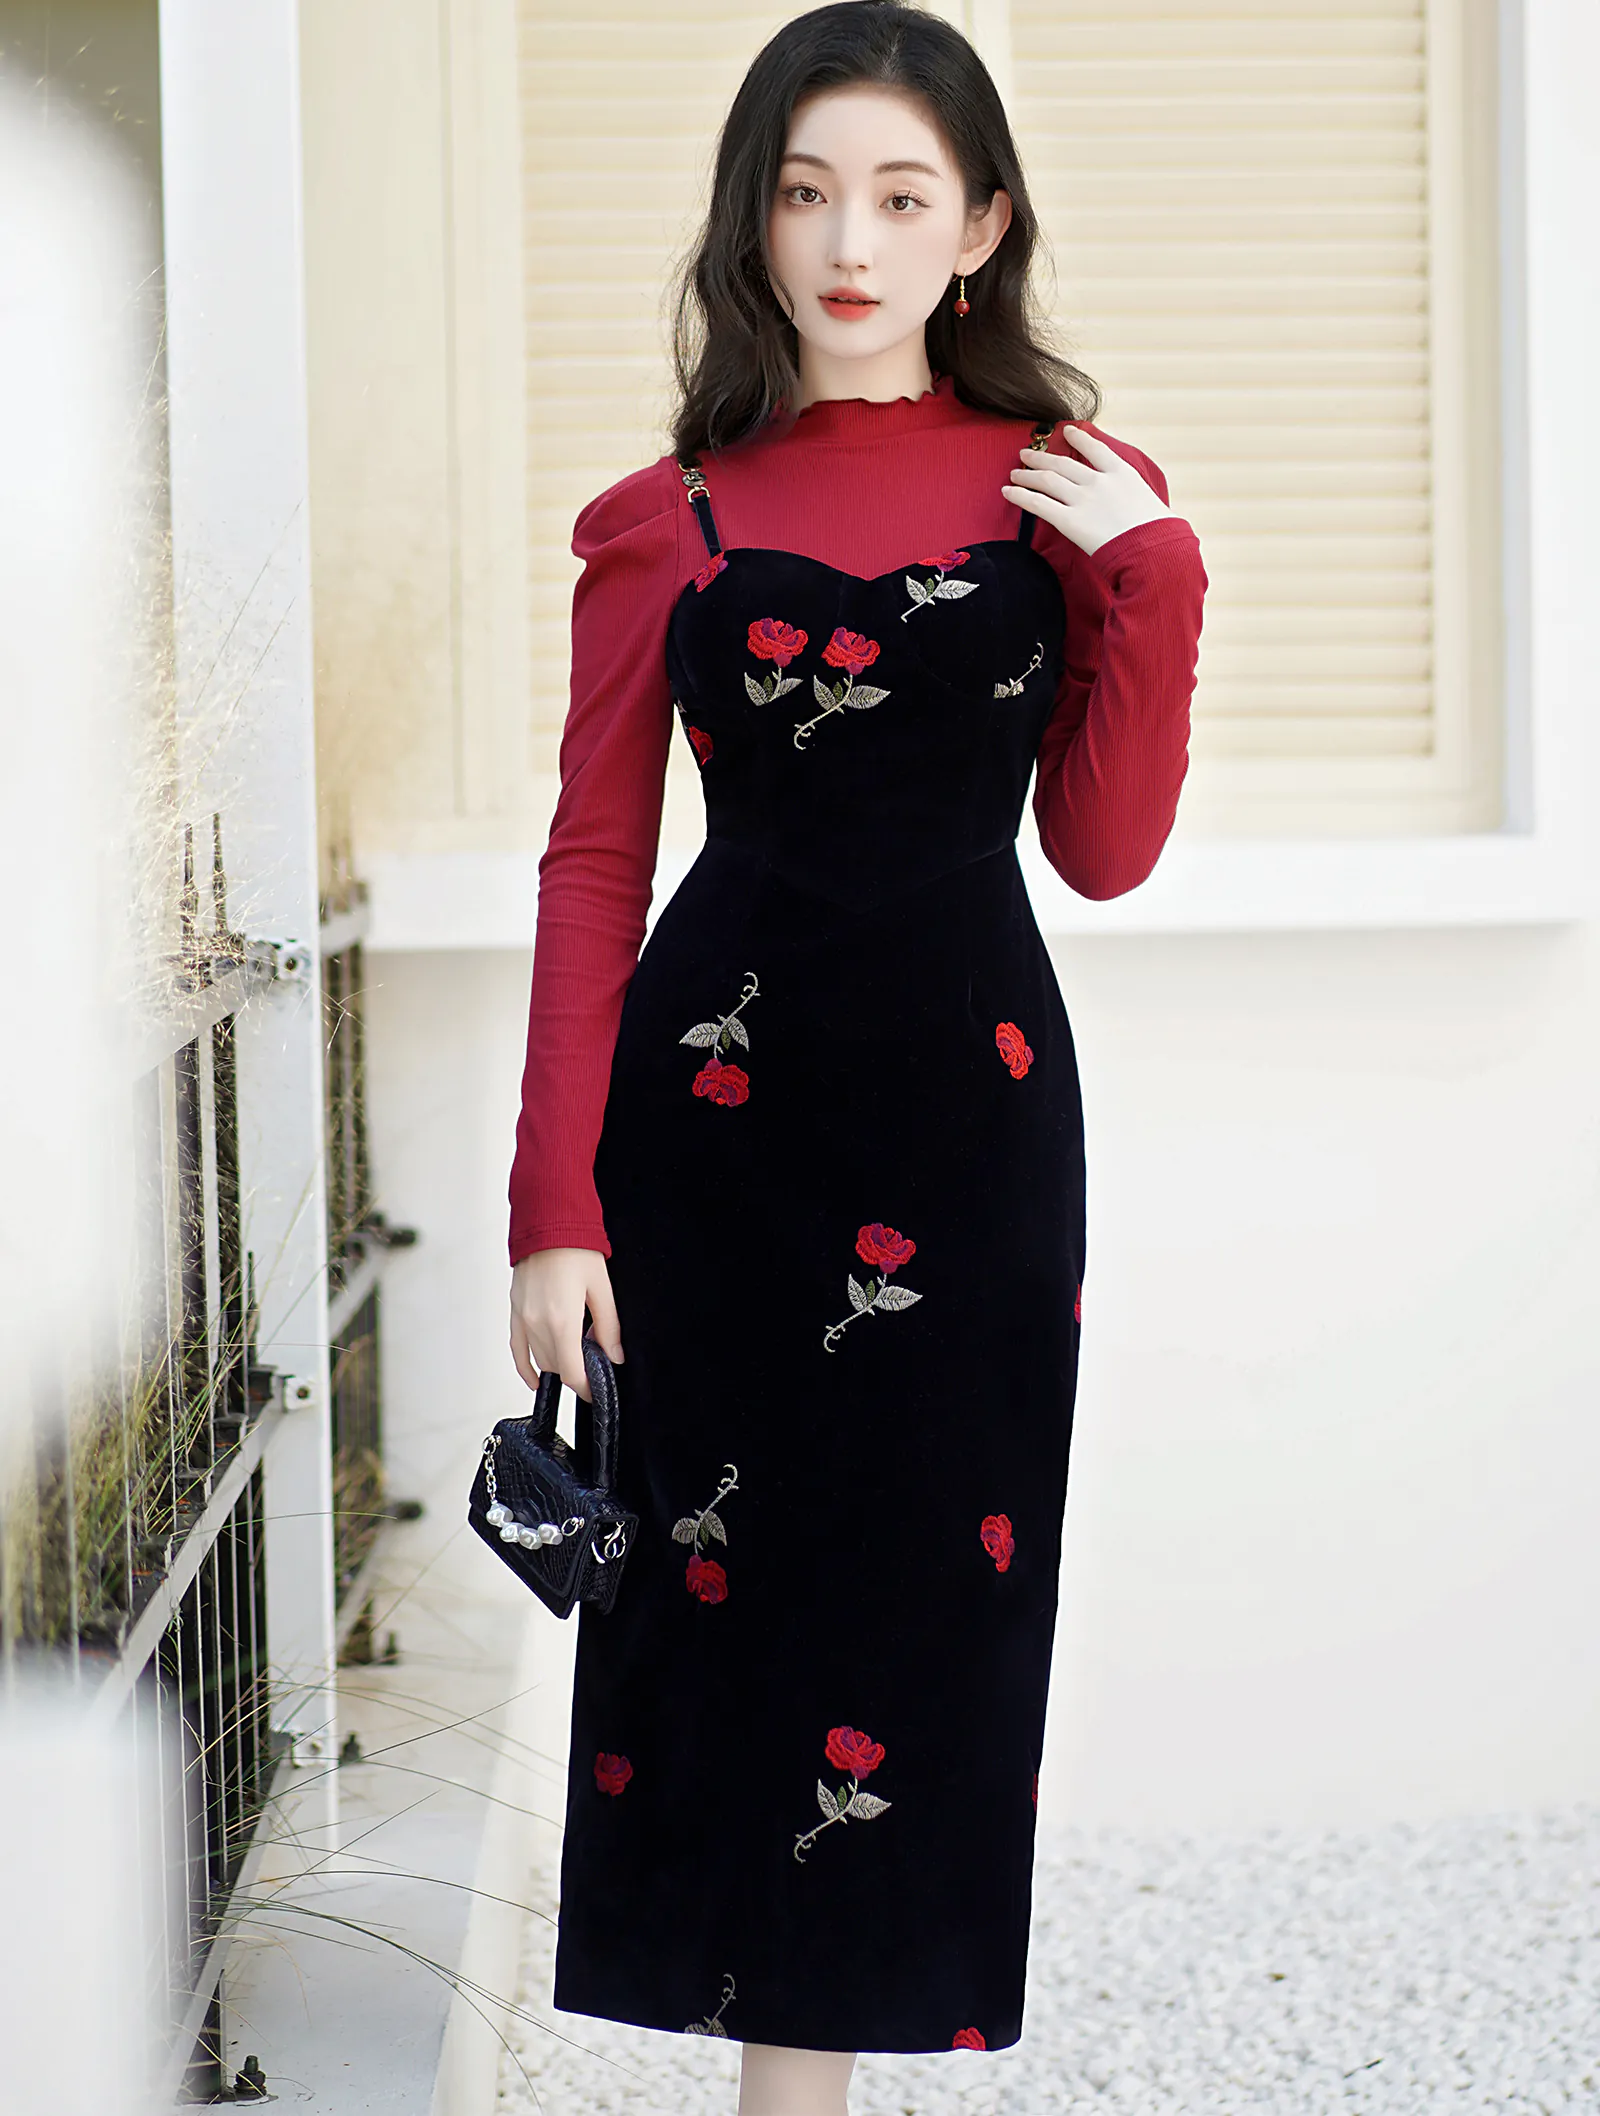 Sweet Rose Embroidery Black Slip Dress with Red Sweater Casual Outfit01